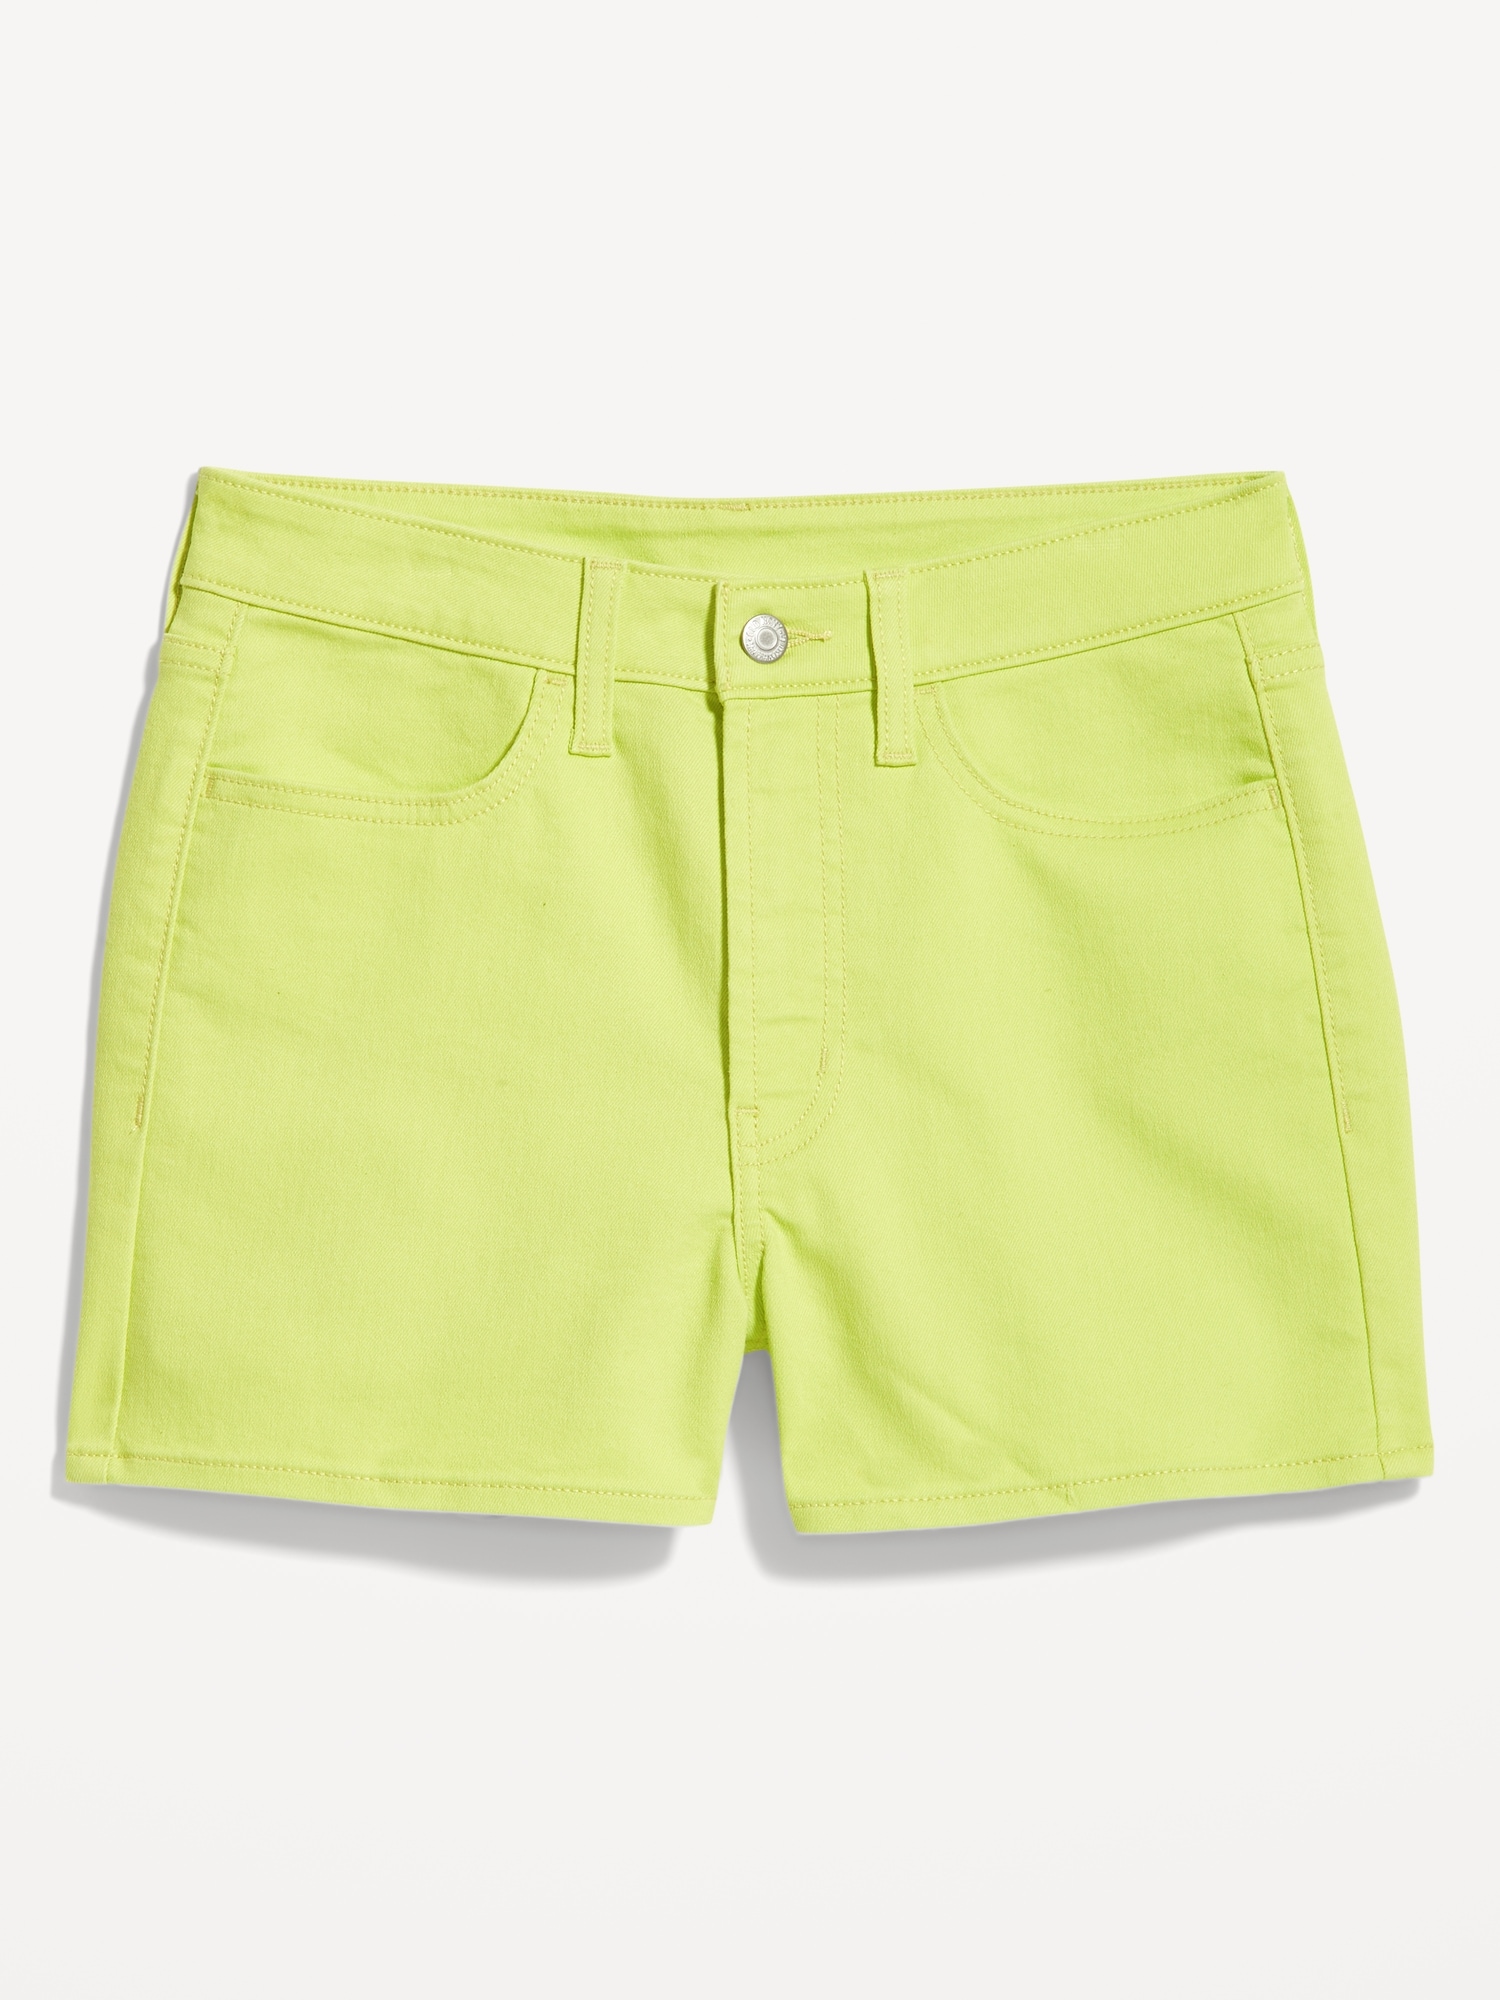 The Best Denim Shorts by Inseam - Living in Yellow